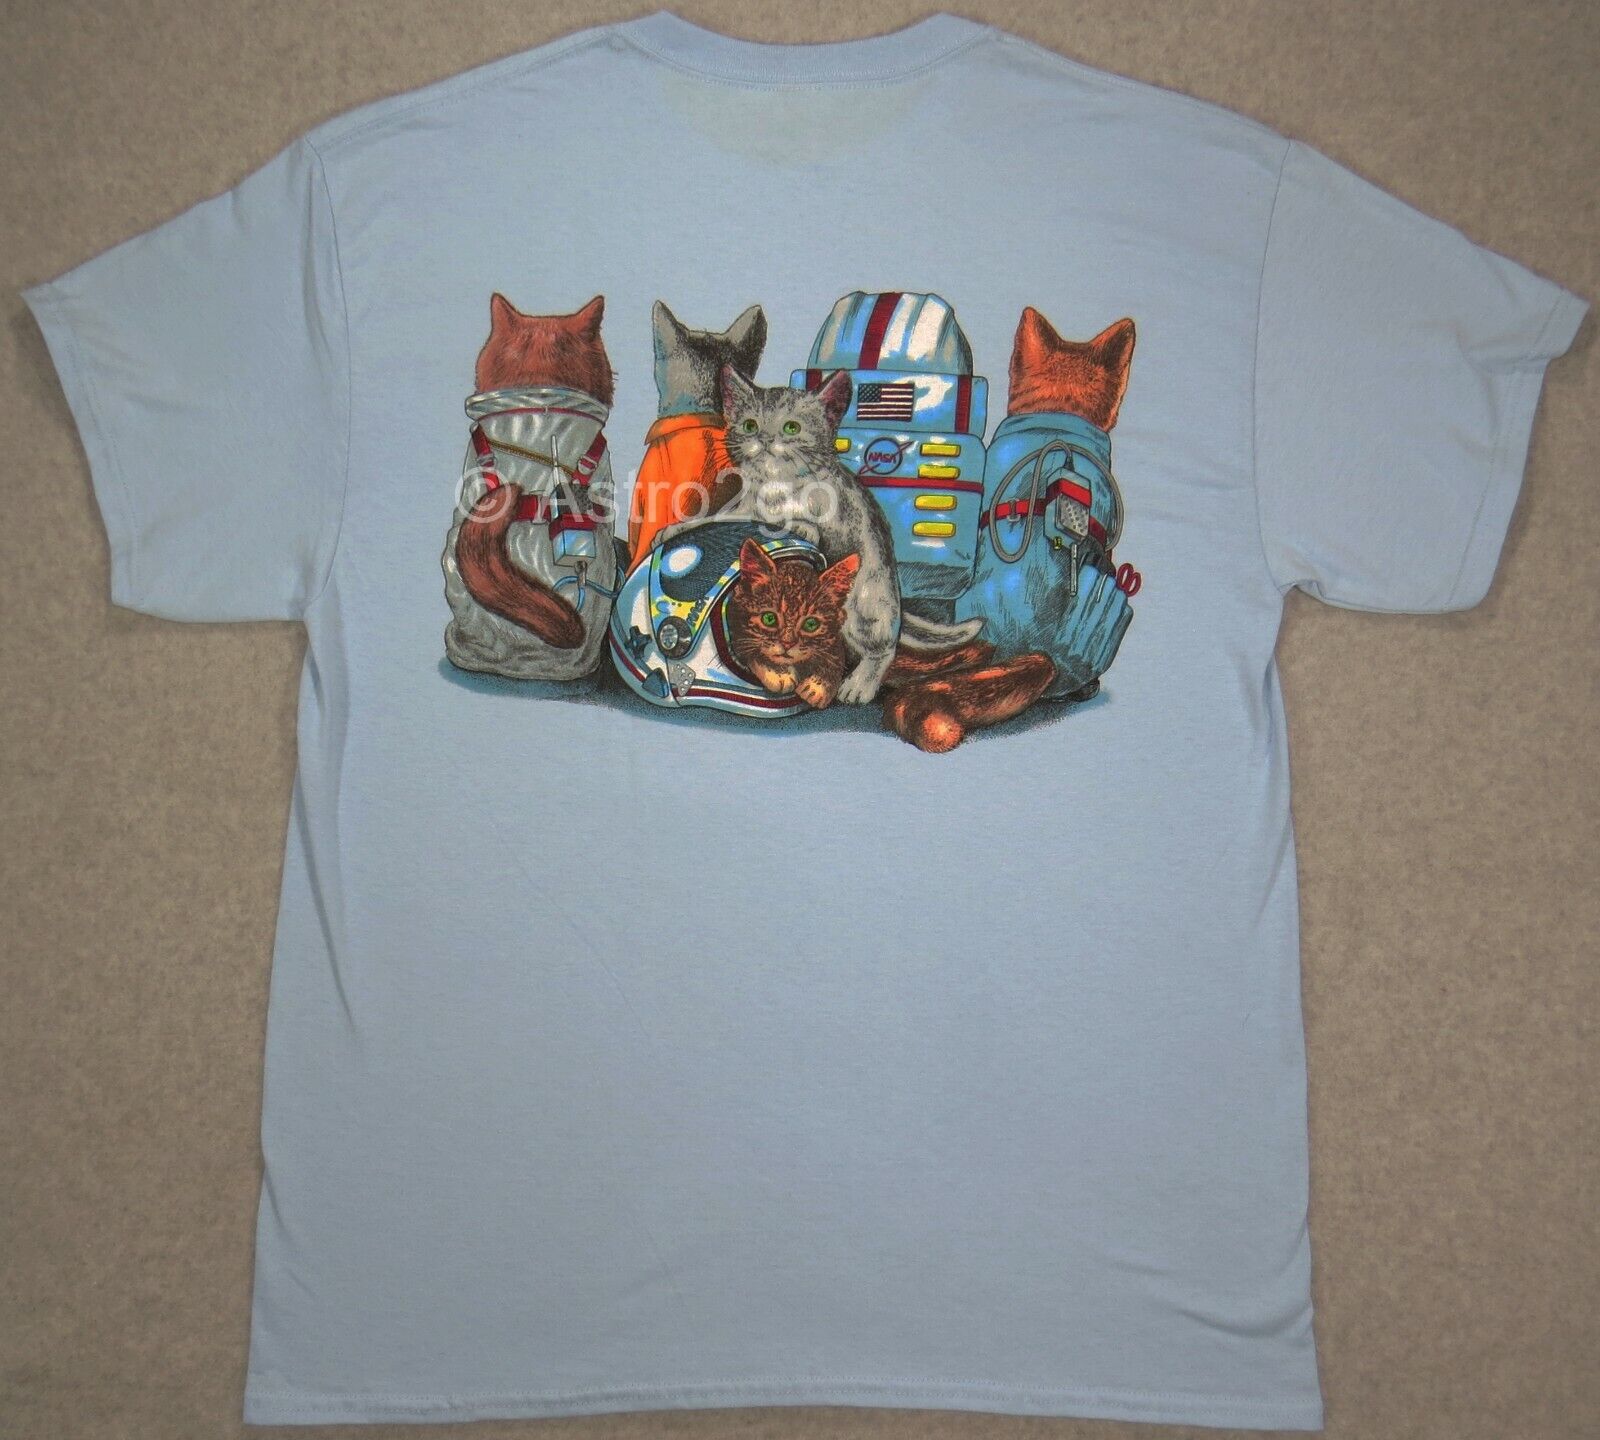 SPACE CATS--NASA Astronaut Flight Suits Astronomy Science 2 sided T shirt  S-3XL+ | eBay